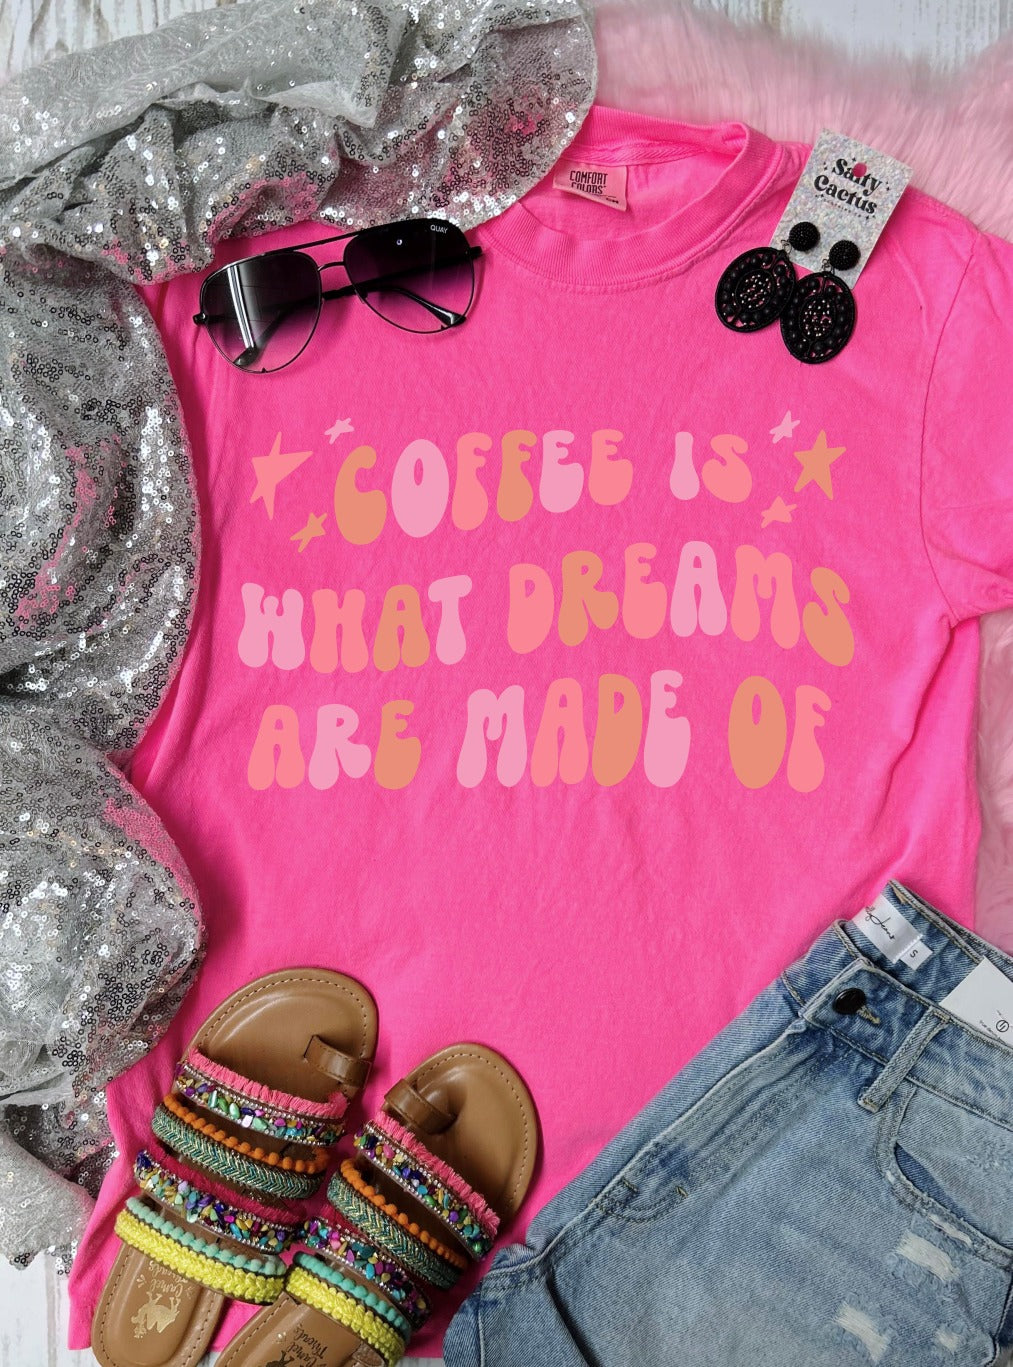 *DTF* Coffee is what Dreams are Made Of Neon Pink Comfort Color